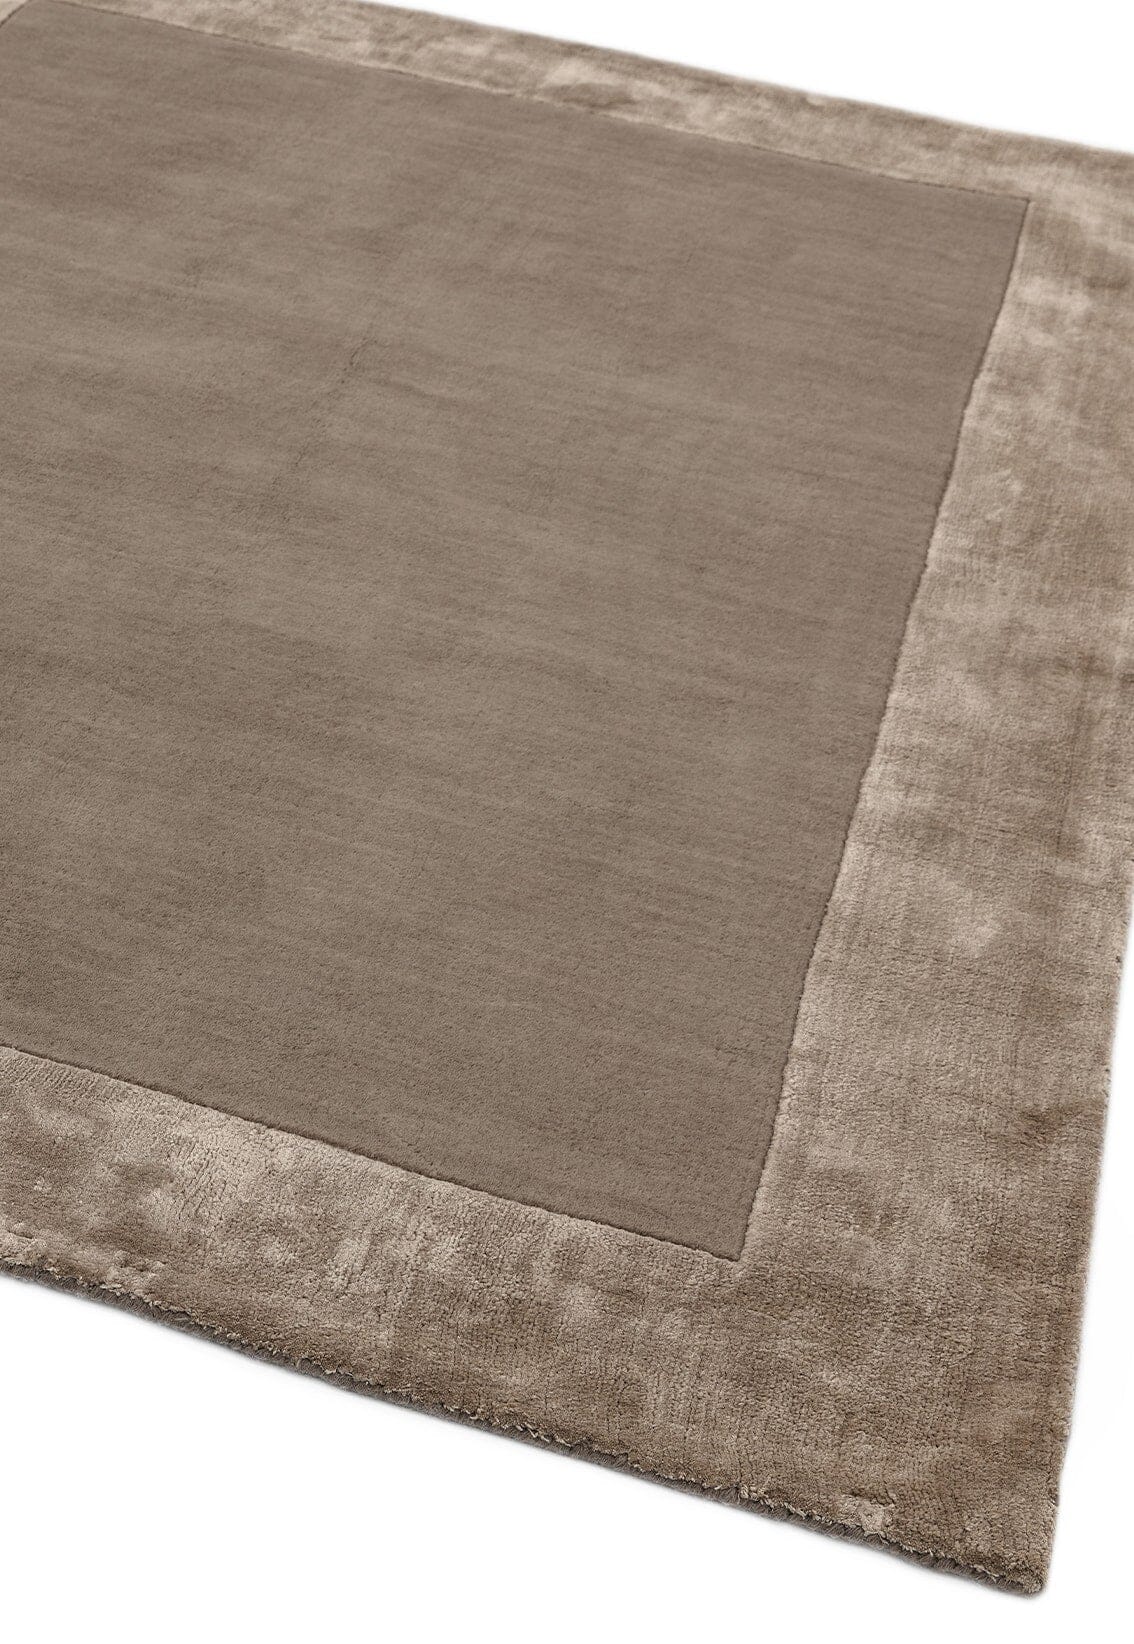 Asiatic Carpets Ascot Hand Woven Rug Taupe - 160 x 230cm